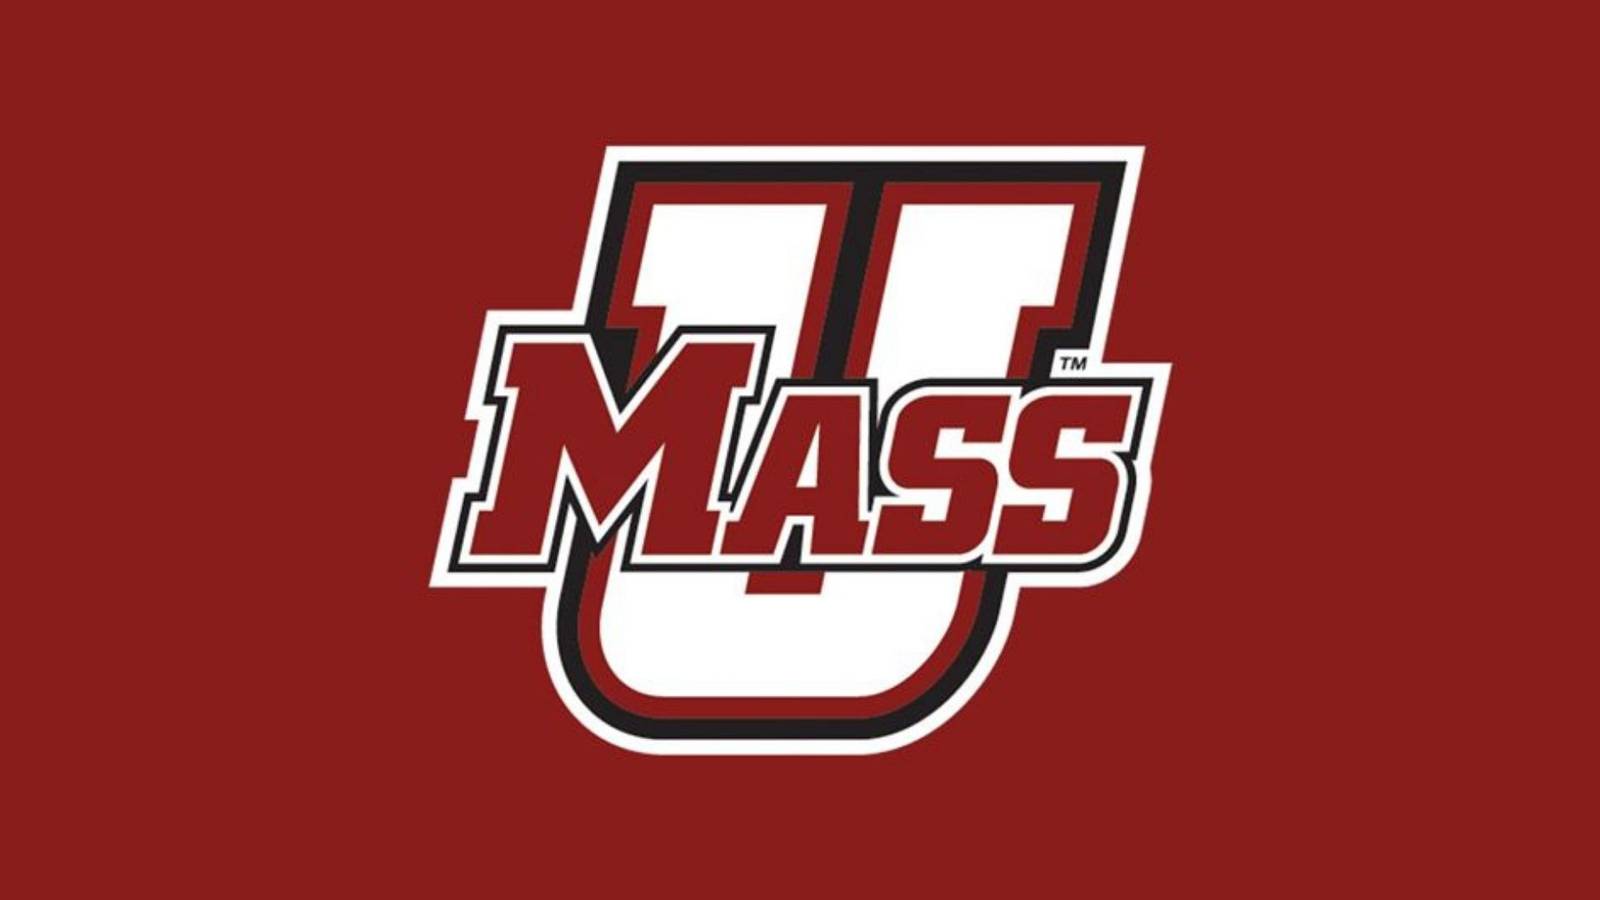 Umass Amherst Basketball Coach Fired After Five Years With Team Boston 25 News 